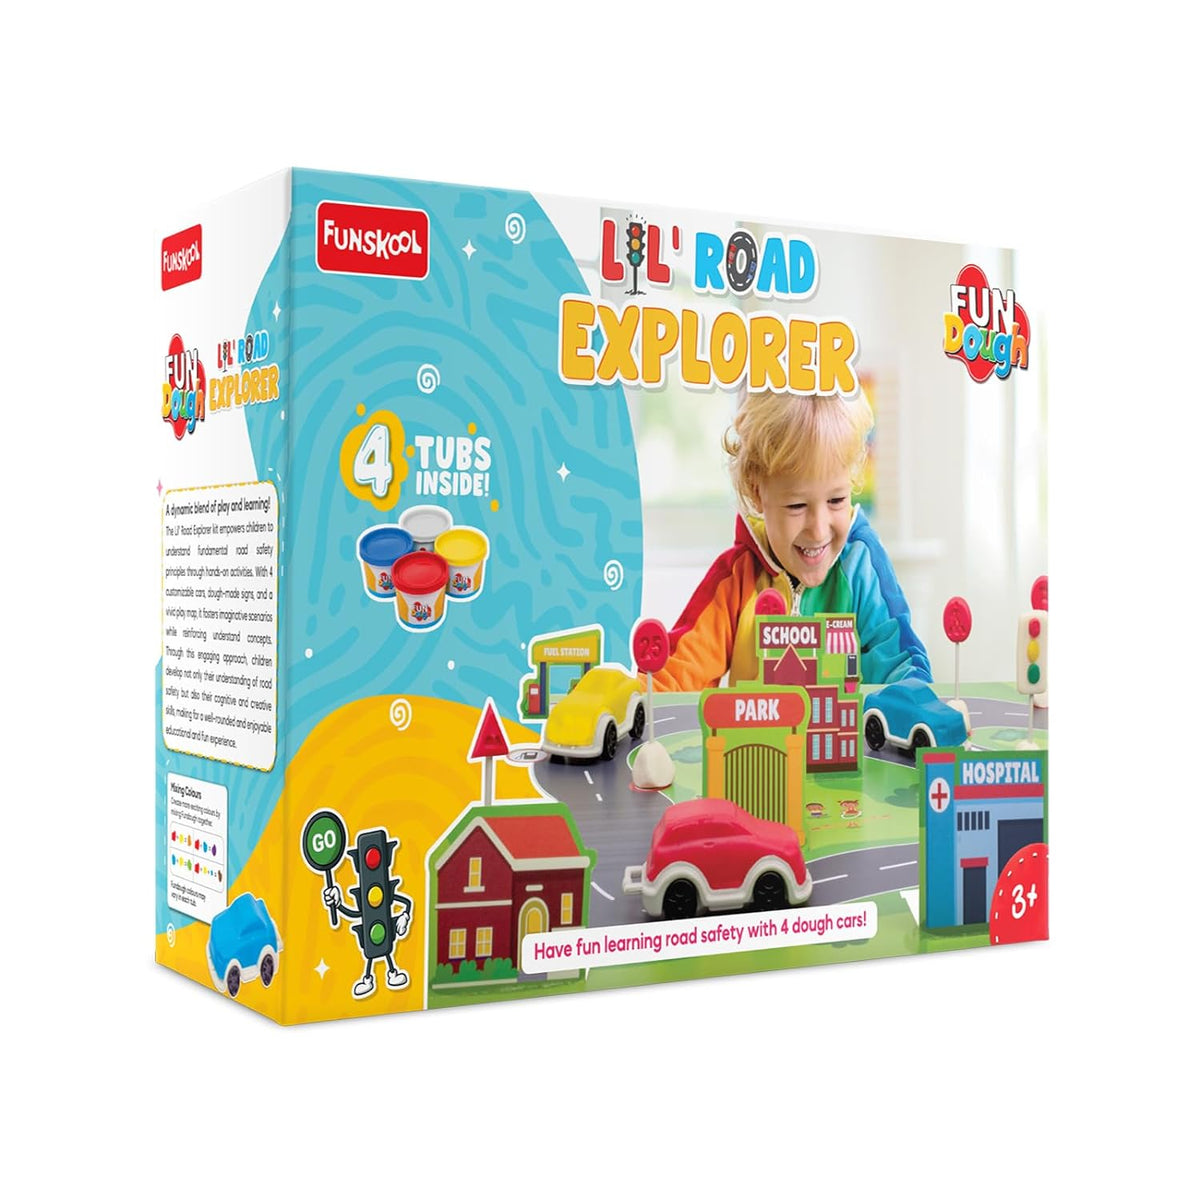 Funskool Fundough Lil' Road Explorer Cars Playset, Learn Traffic Safety and Traffic Rules, Flash Cards - Shaping, Sculpting Toy For 3 Years and Above